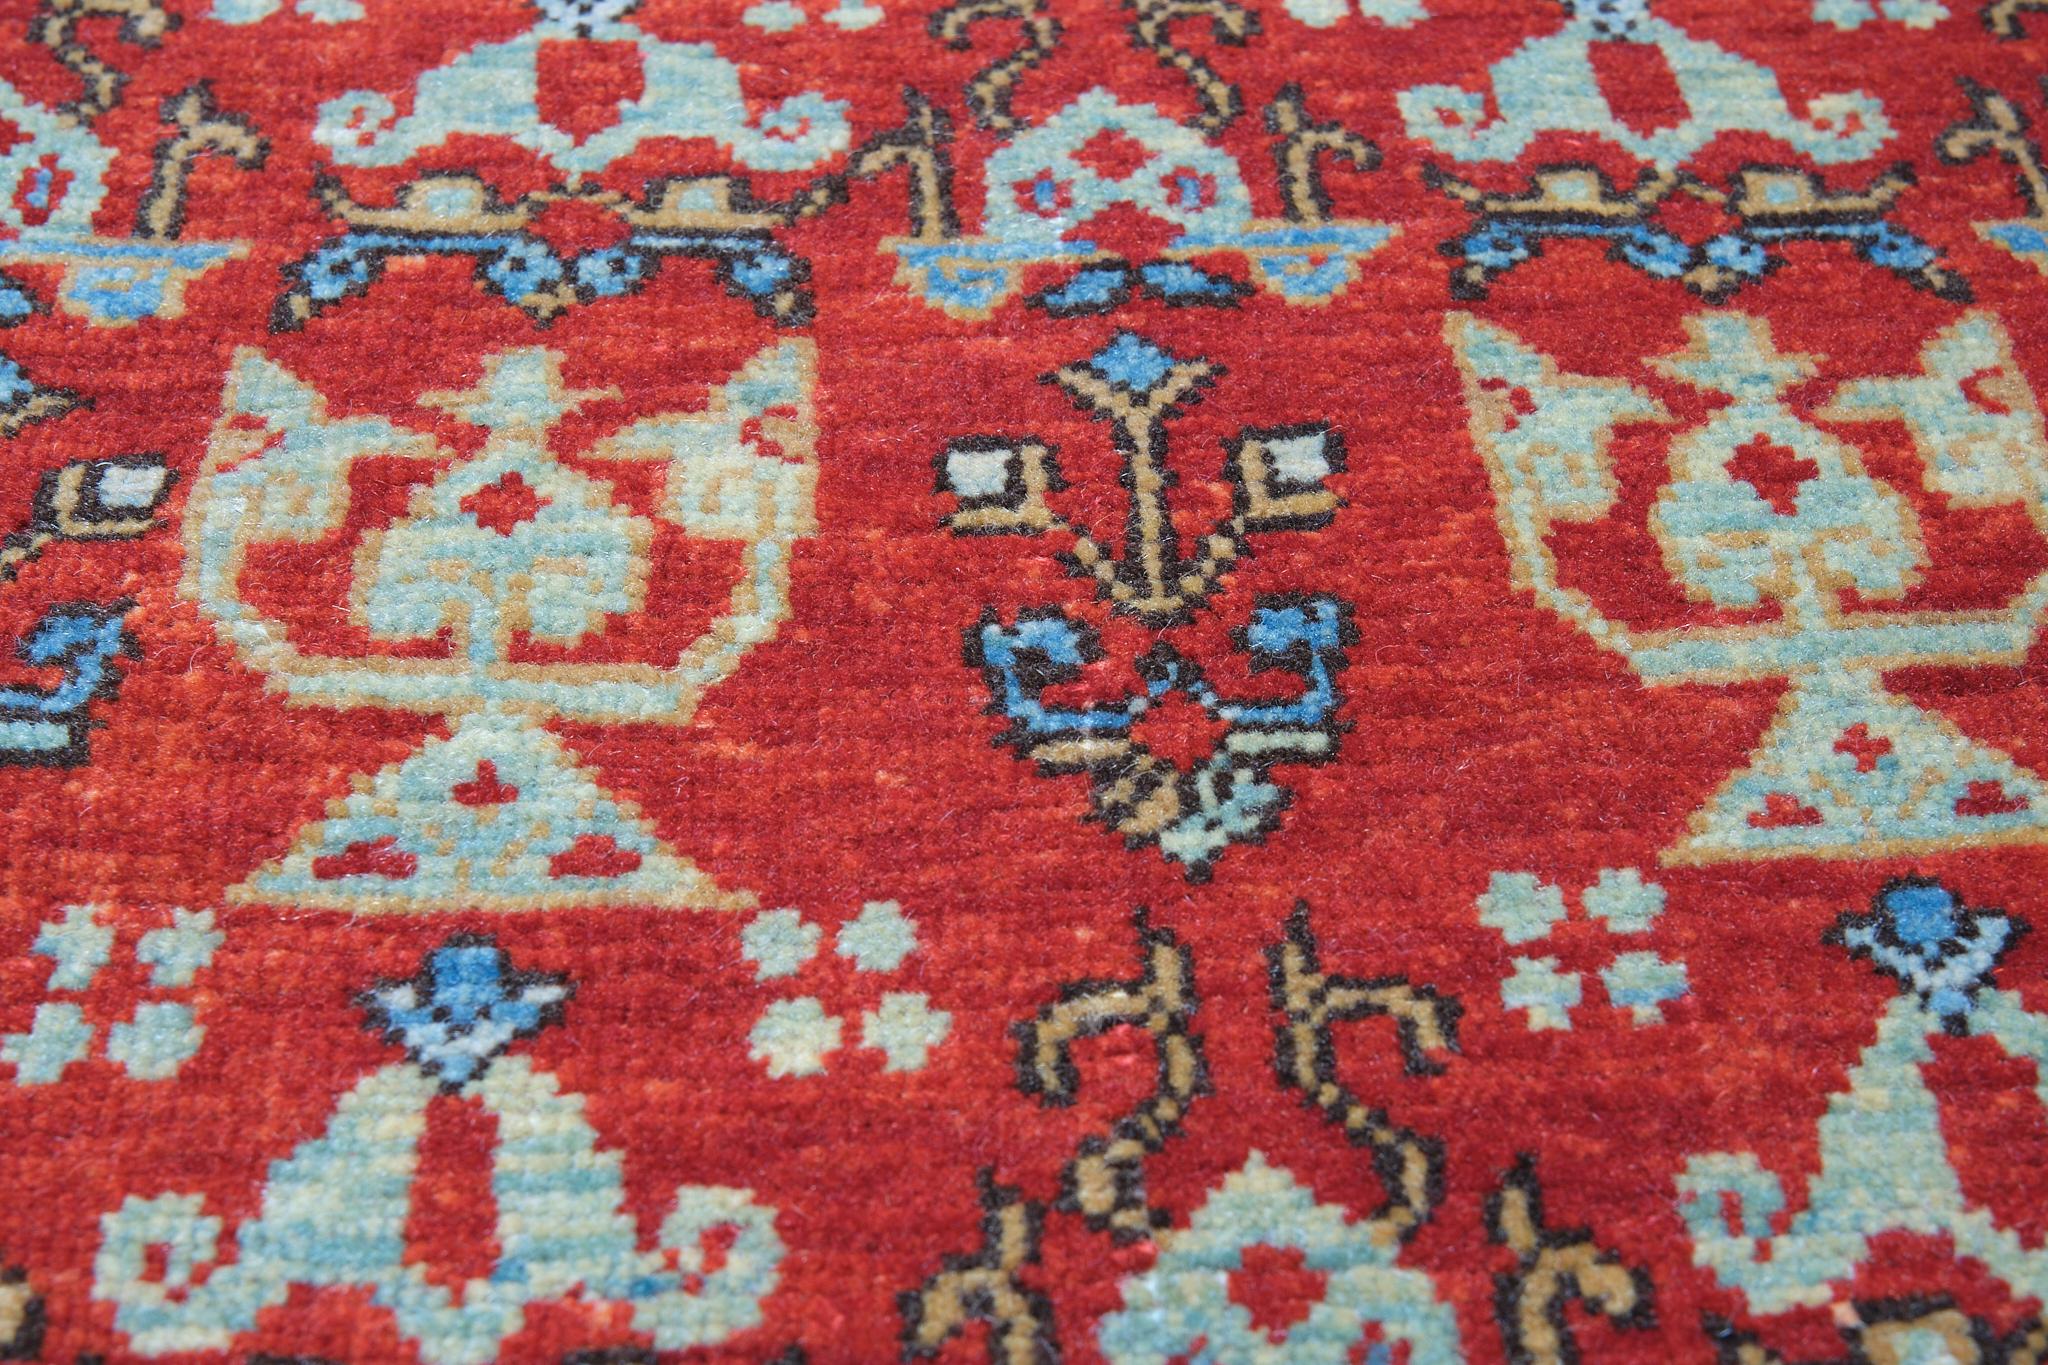 Vegetable Dyed Ararat Rugs Mamluk Wagireh Rug with Candelabra Elems Revival Carpet Natural Dyed For Sale